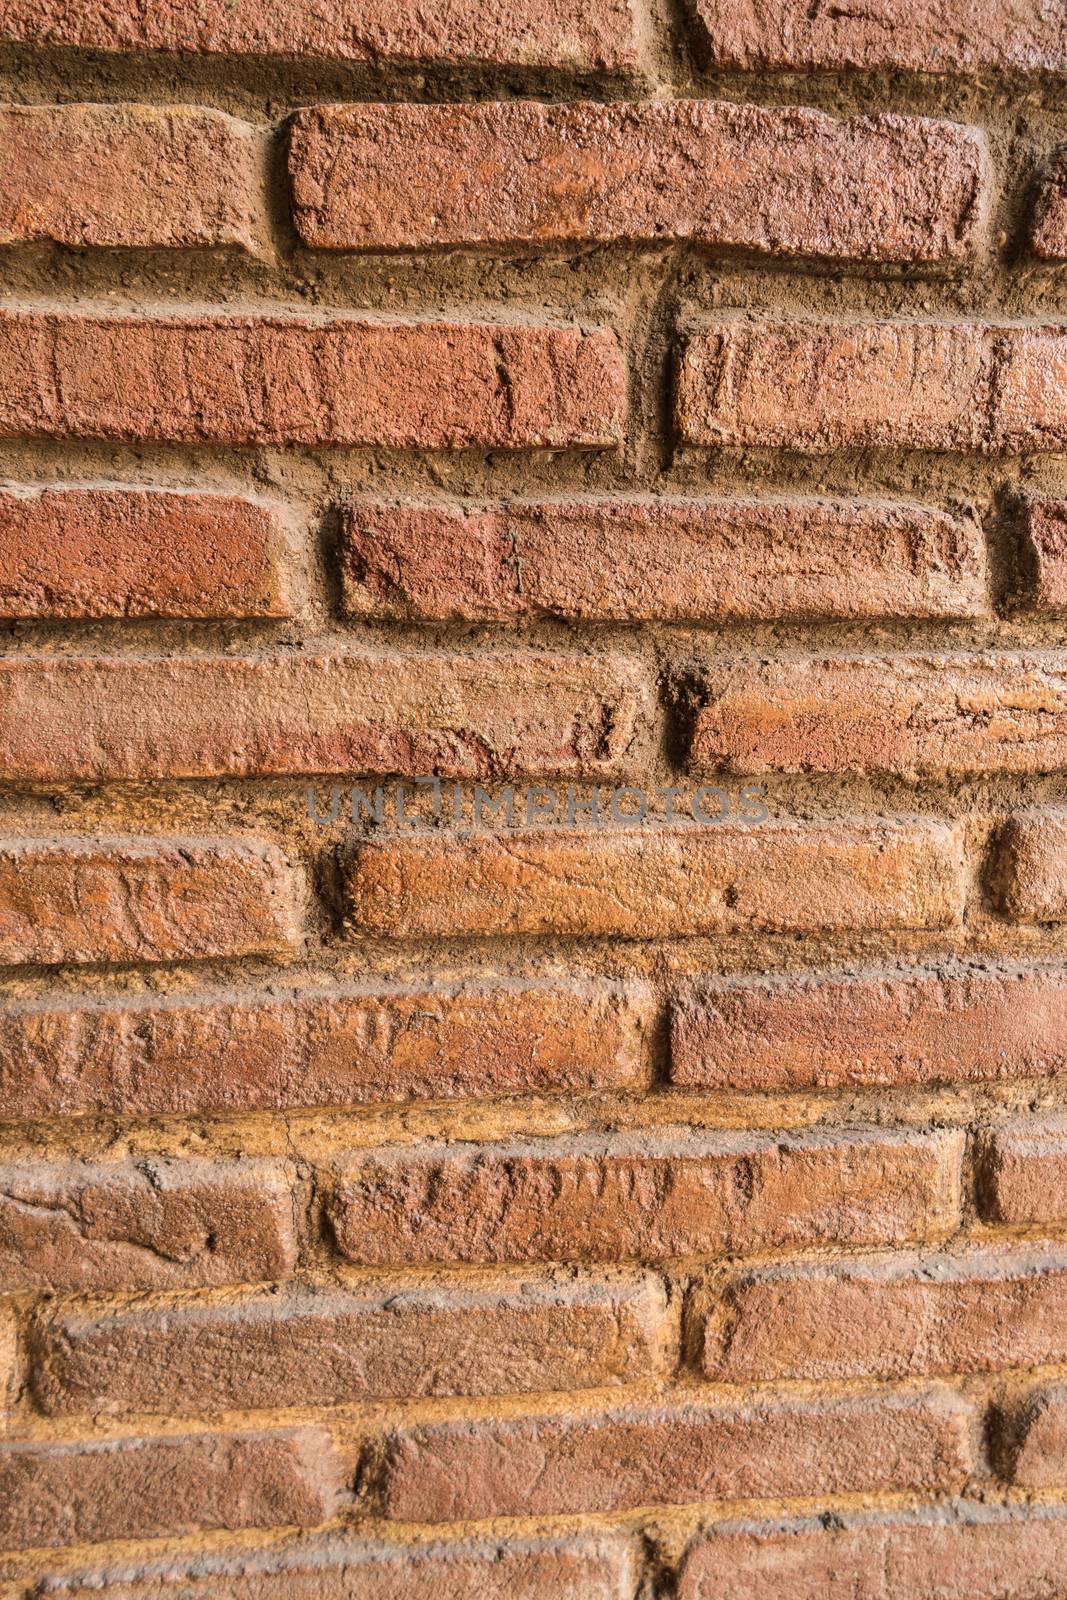 Vintage red brick wall texture background